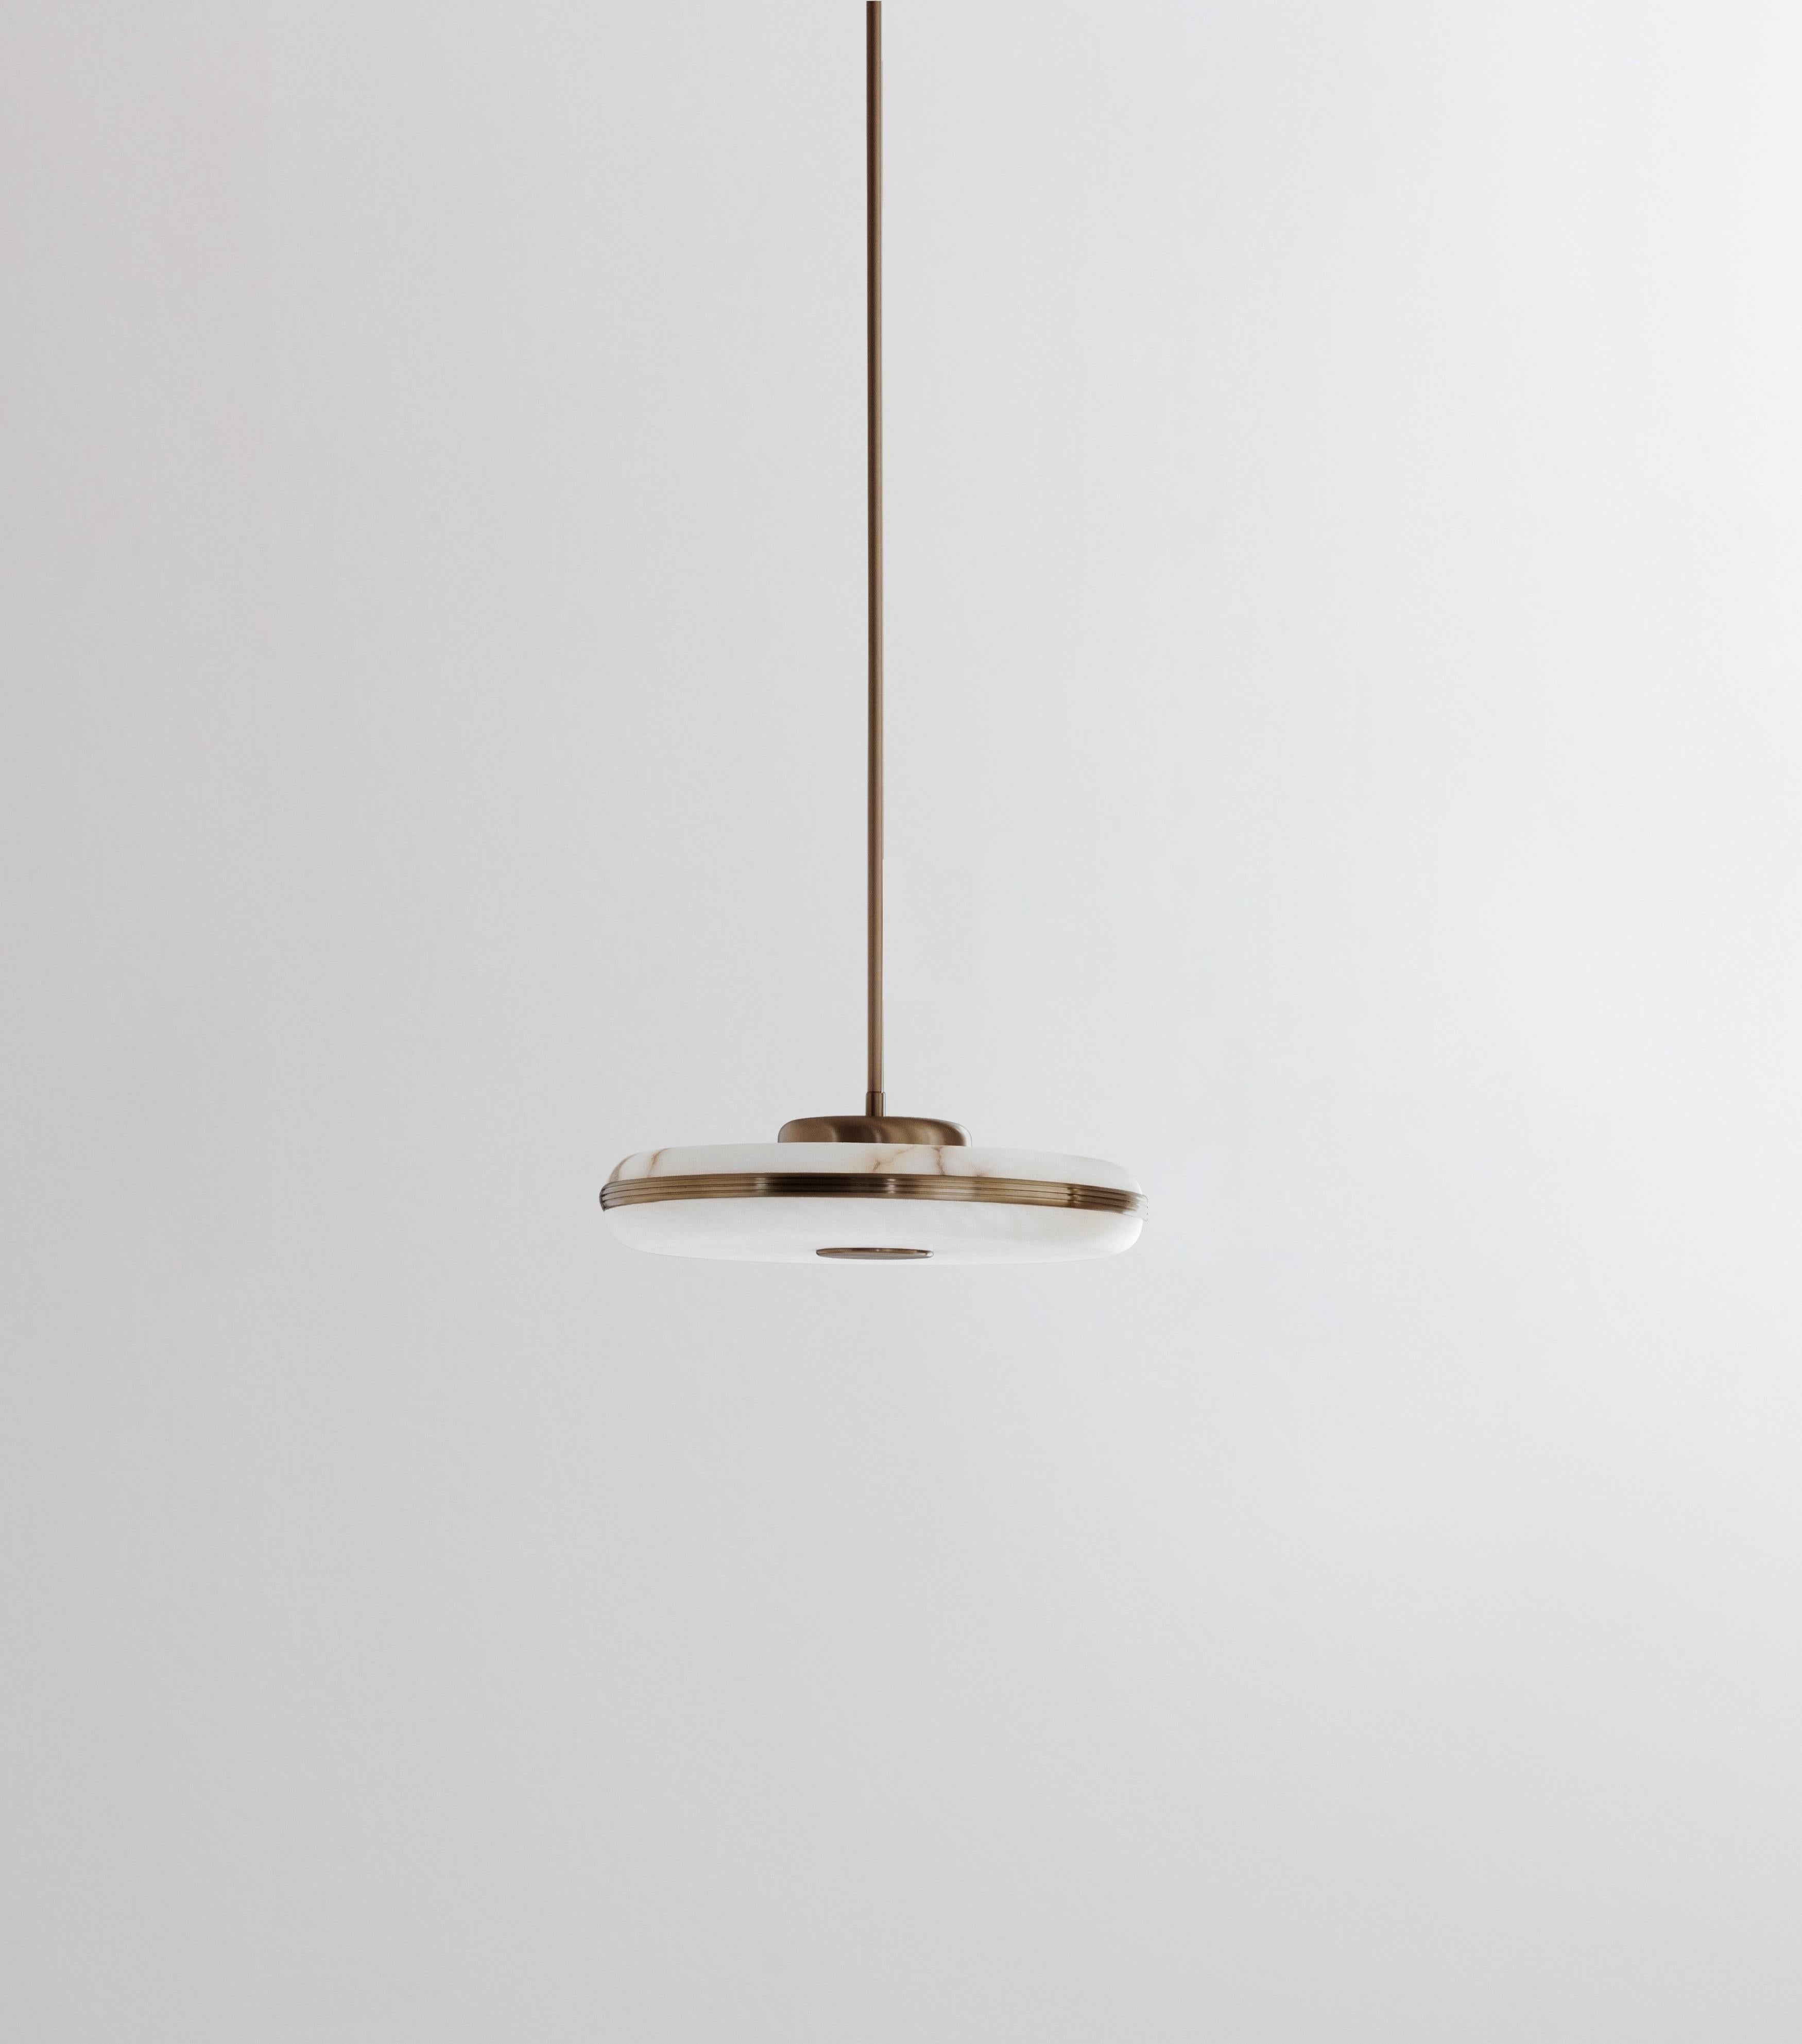 Beran Antique Brass Large Pendant Lamp by Bert Frank
Dimensions: Ø 36 x H 6 cm. 
Materials: Brass and alabaster.

Available in two different sizes. Available in different finishes and materials. Height is customized to order. Please contact us.